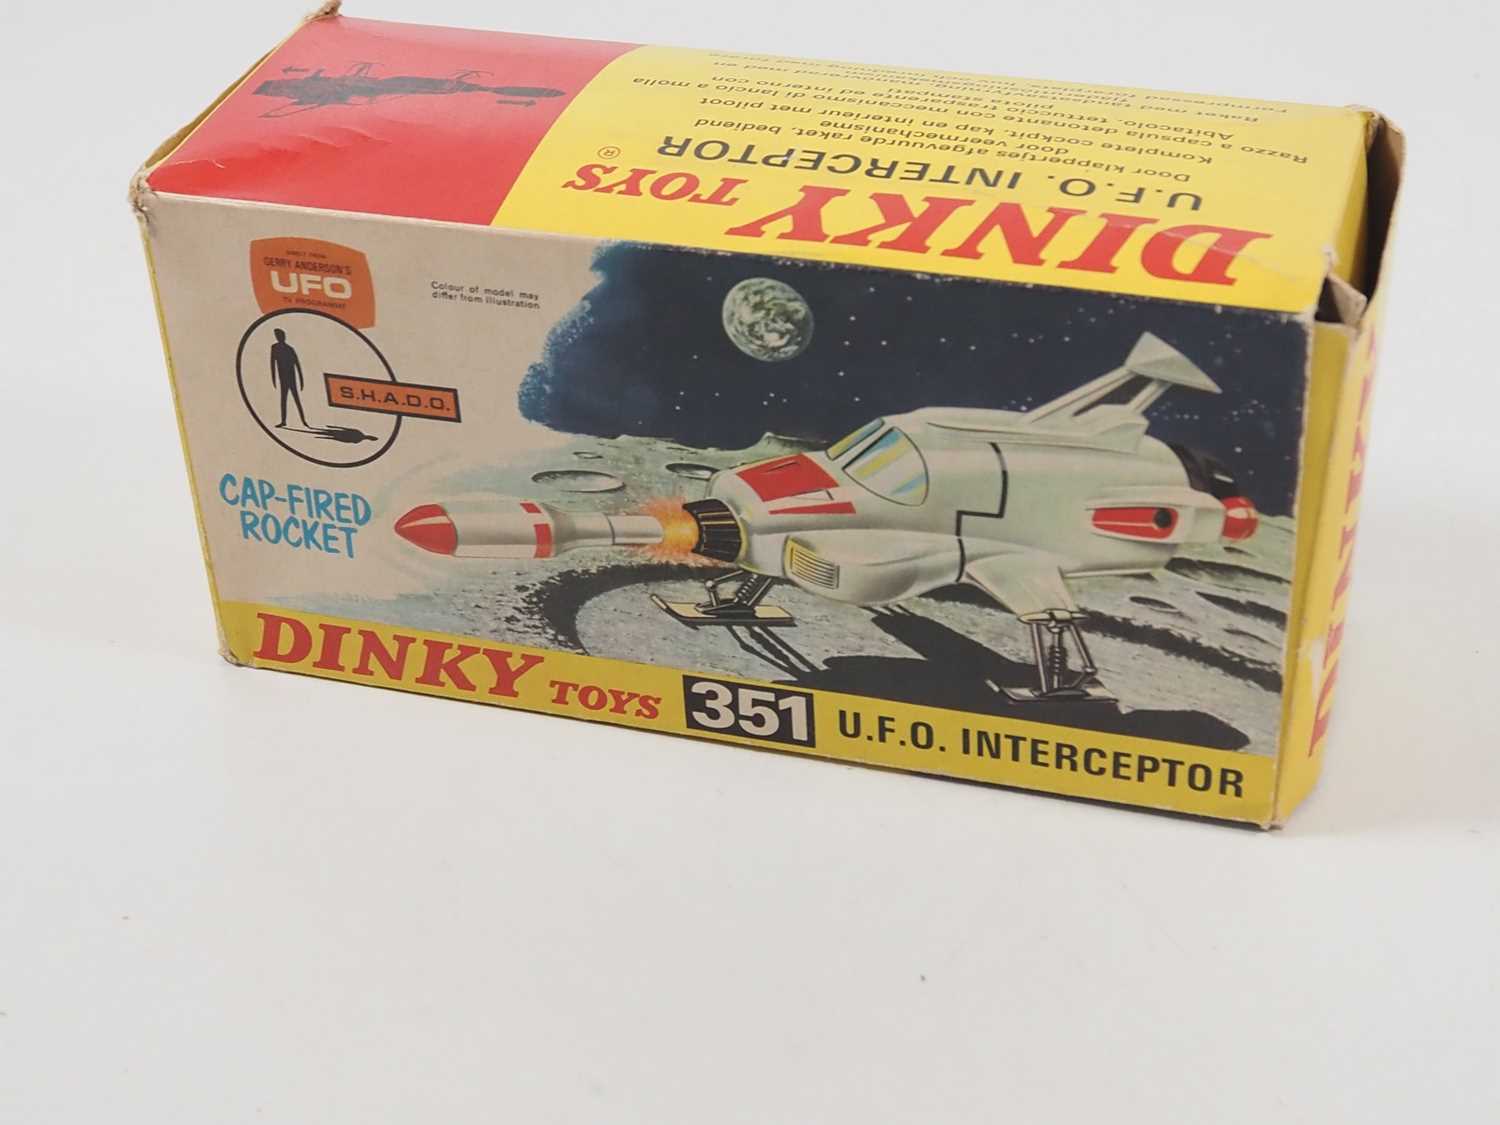 A DINKY 351 Gerry Anderson's 'UFO' Interceptor in metallic green with missile, pictorial card box - Image 8 of 10